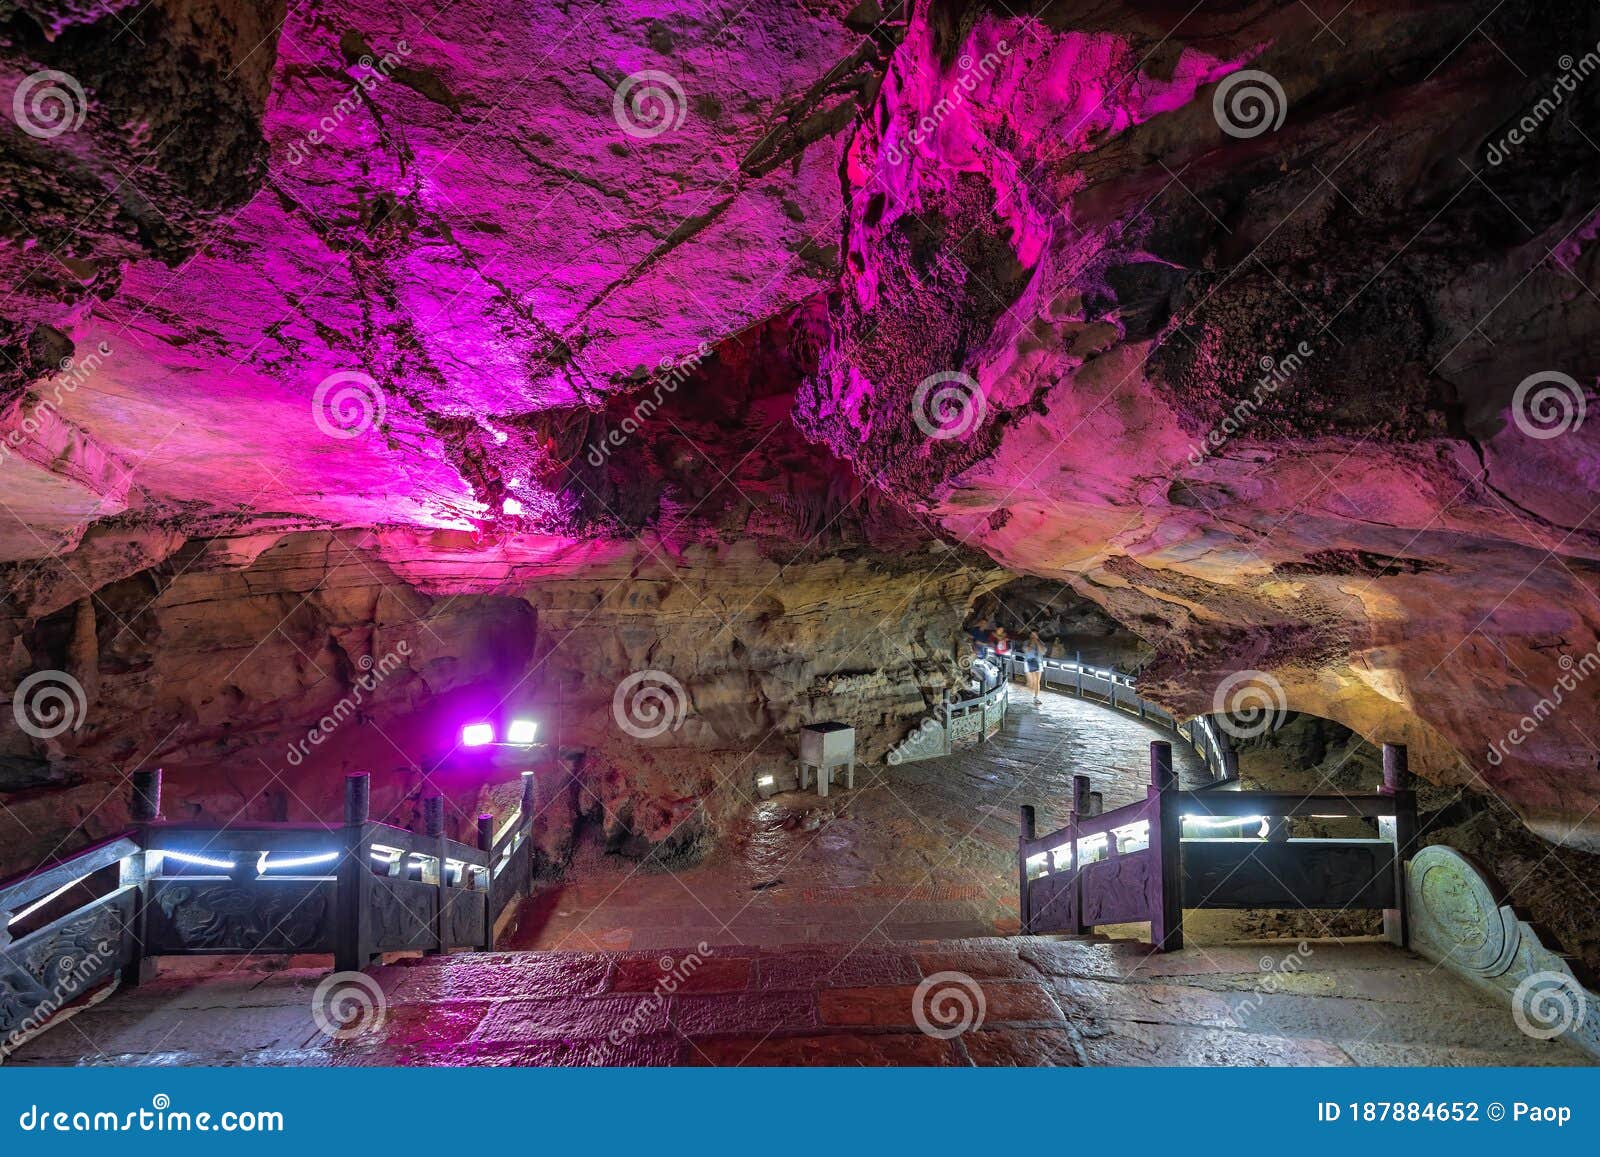 Stunning Huanglong Yellow Dragon Cave Stock Photo Image Of Caves